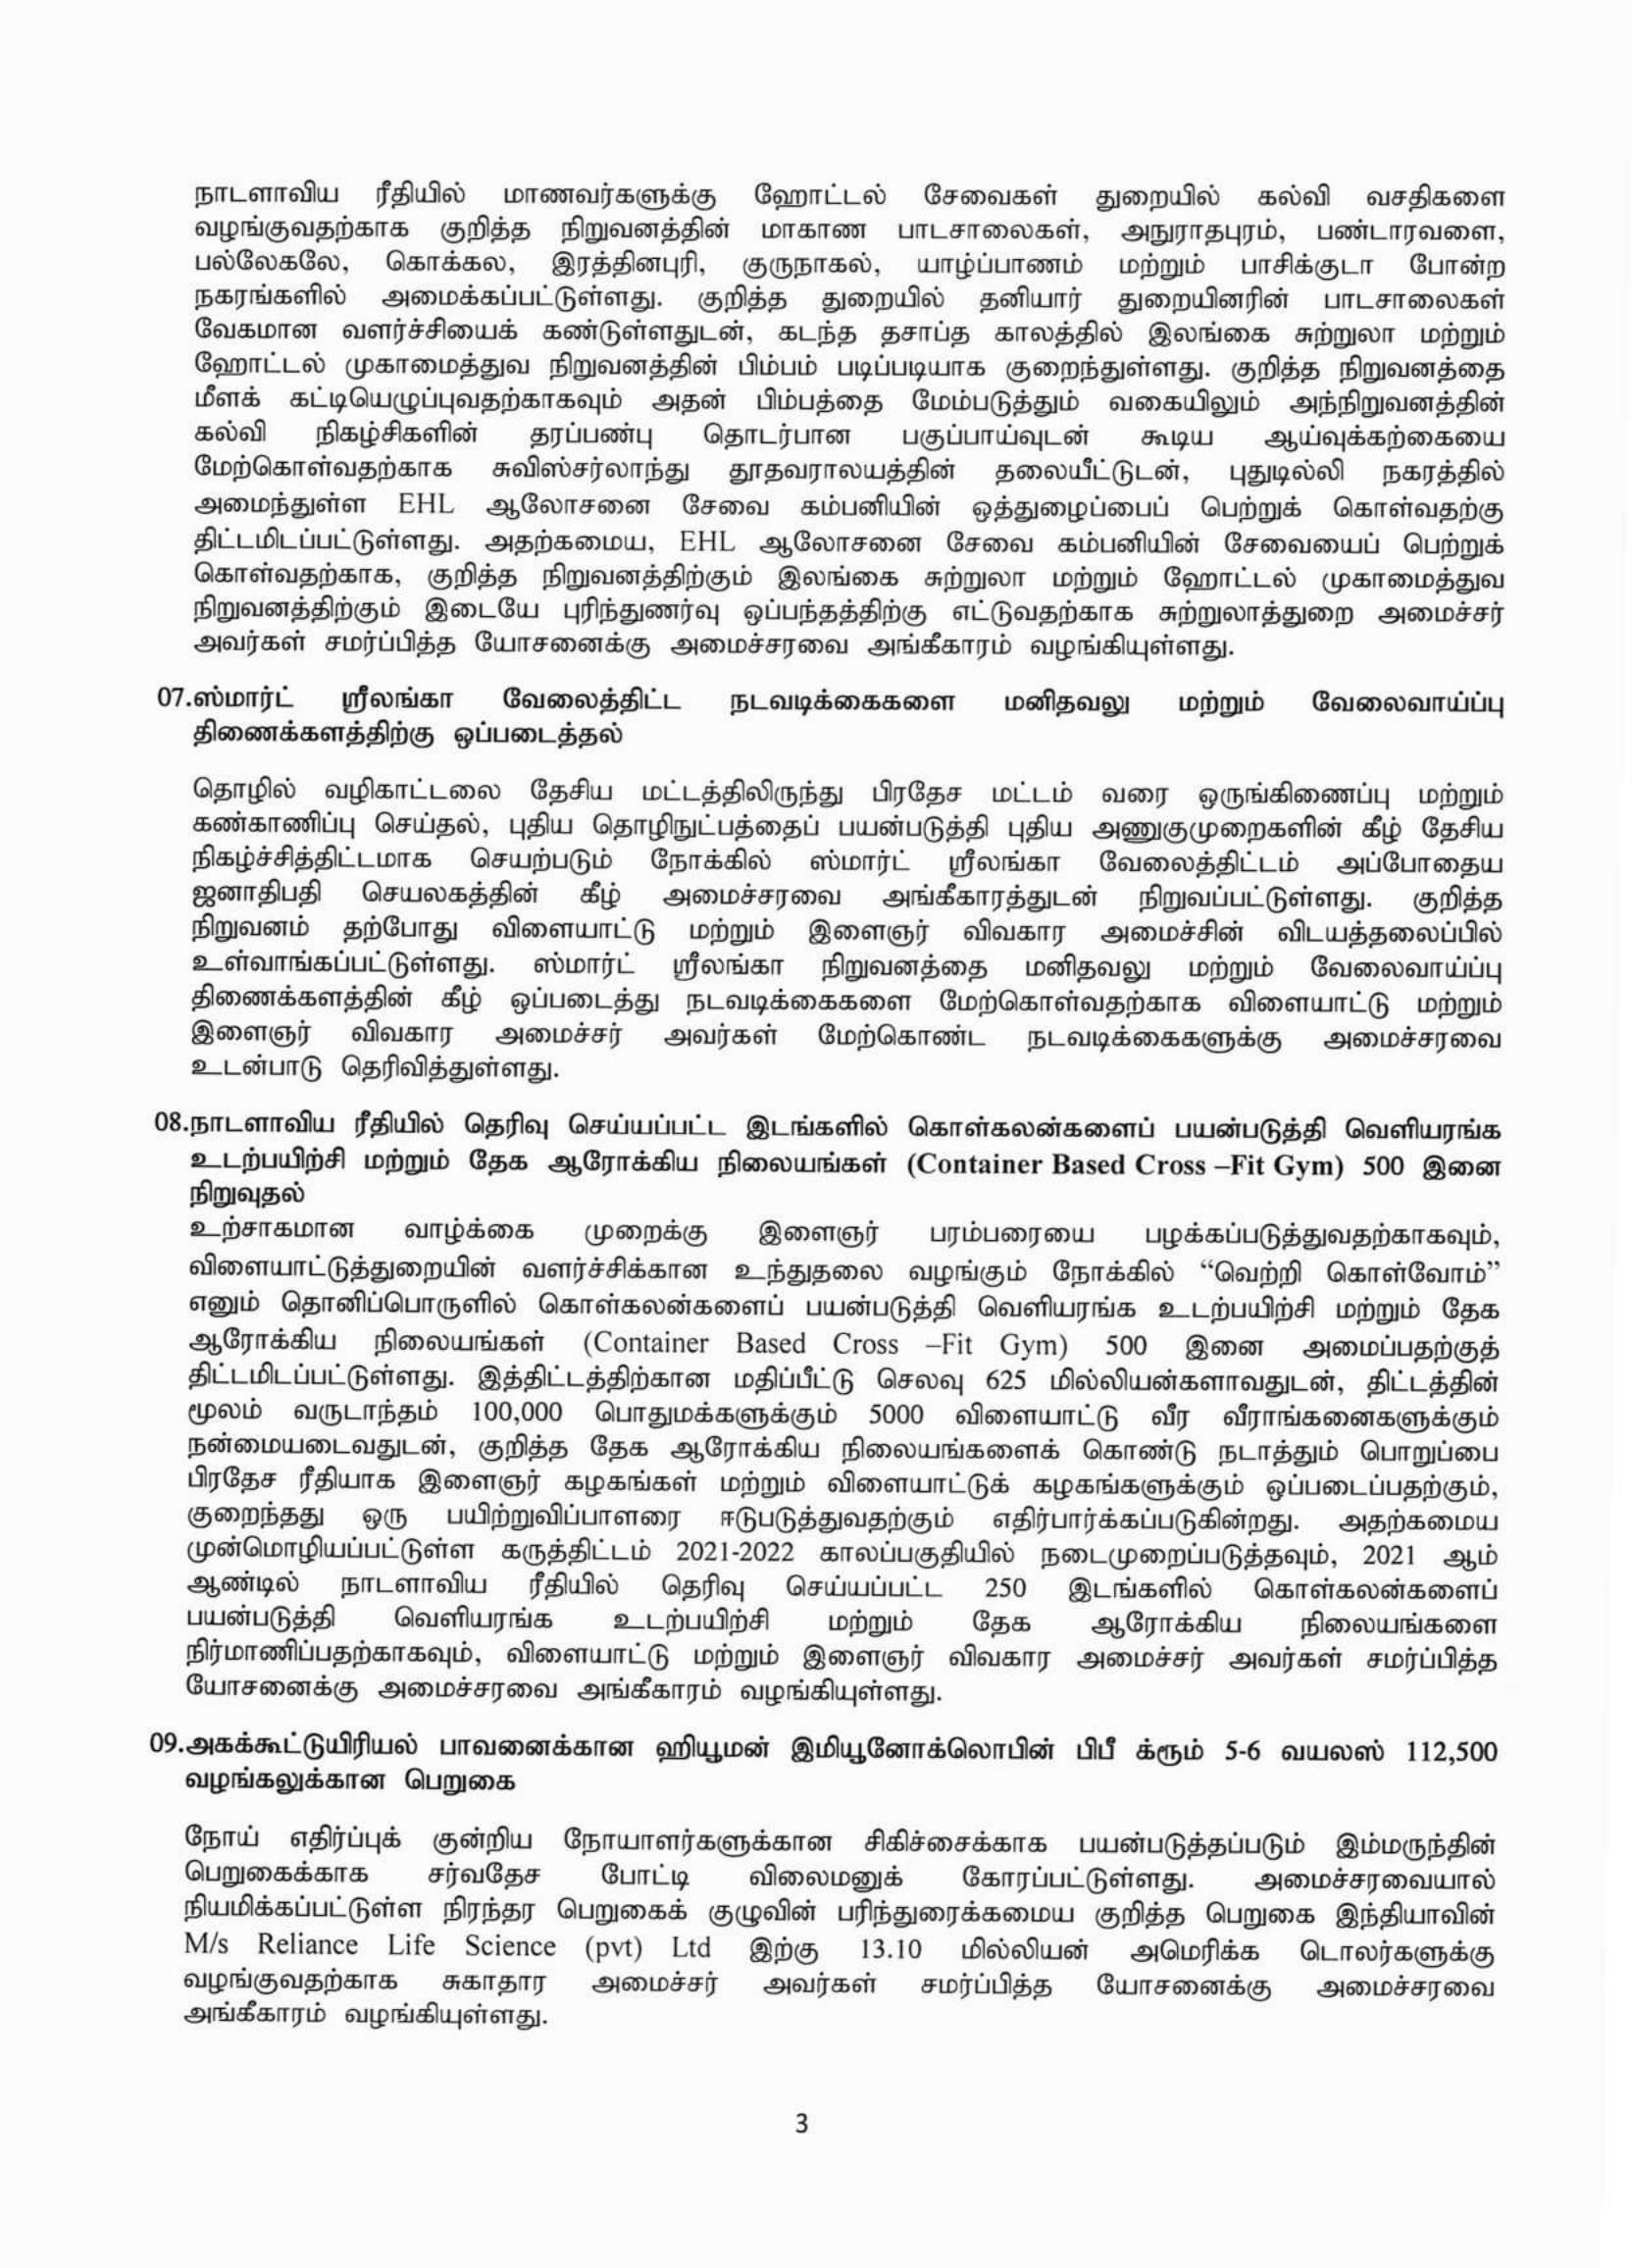 Cabinet Decision on 03.05.2021 Tamil 3